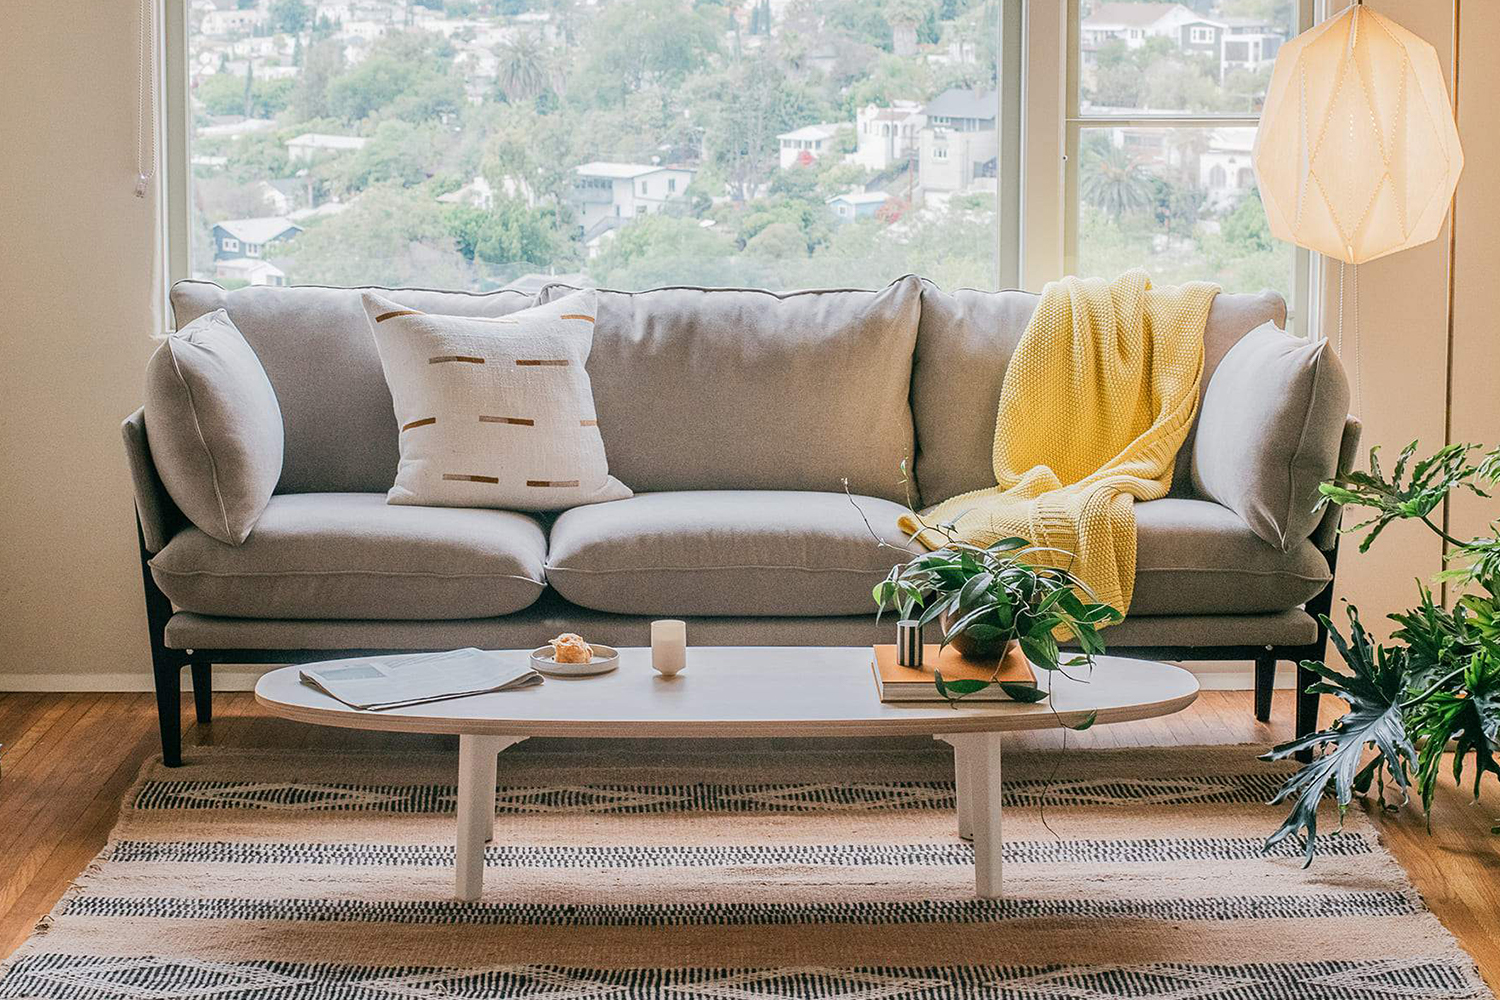 The classic sofa from Floyd sitting next to an oval coffee table in a living room